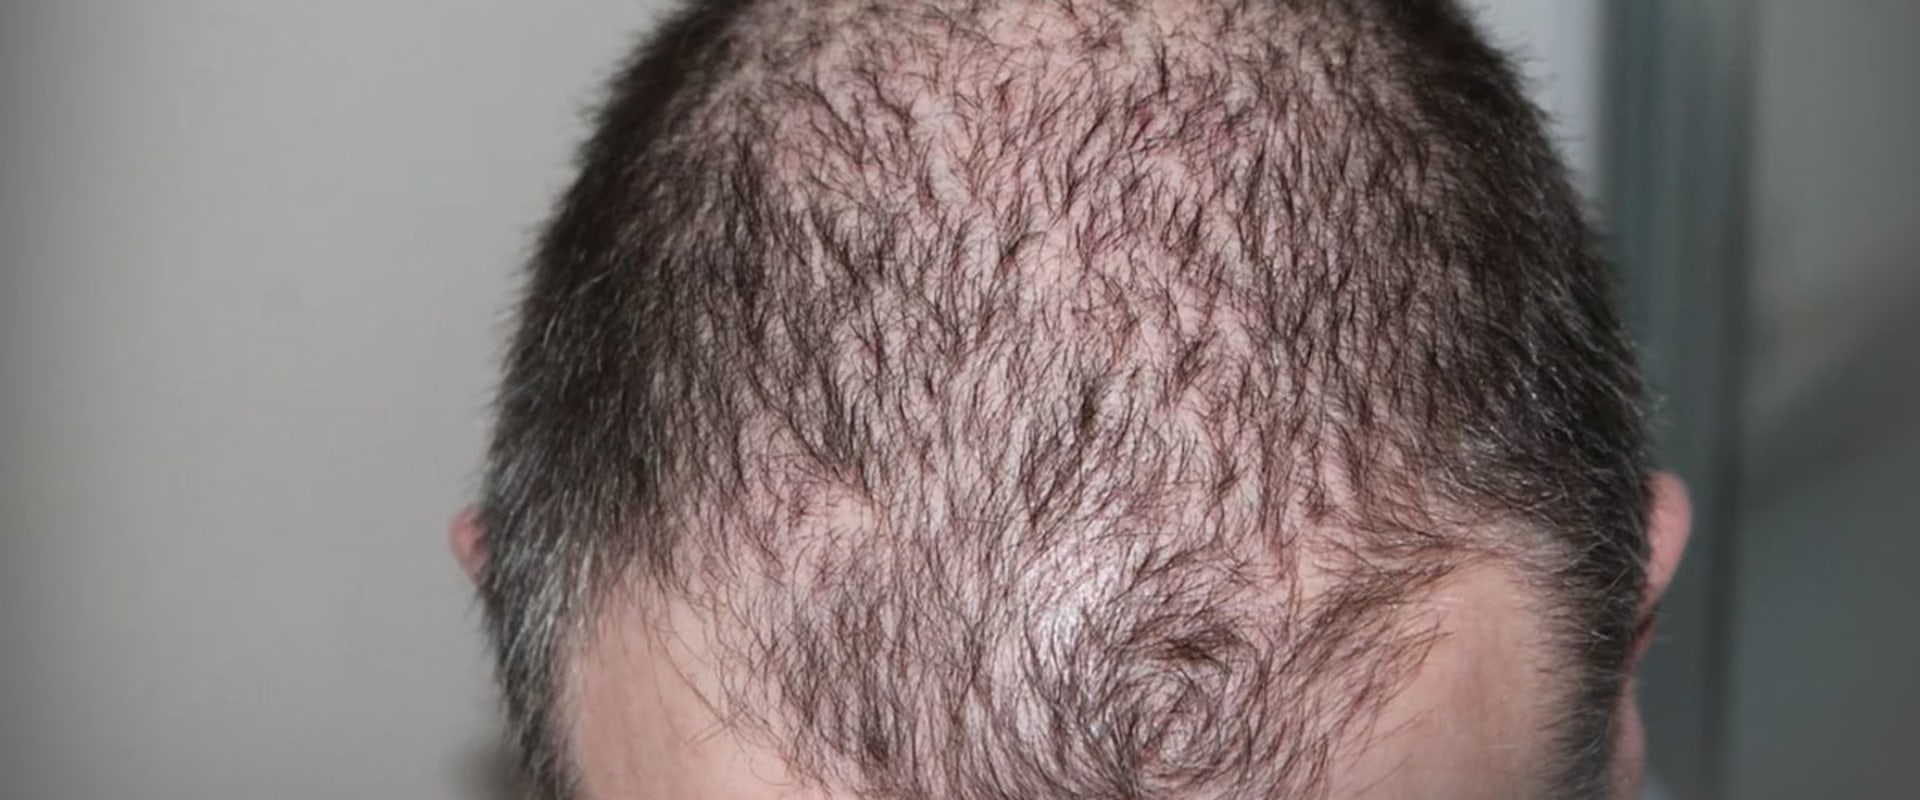 Iron-Deficiency Anemia and Hair Loss: A Comprehensive Overview